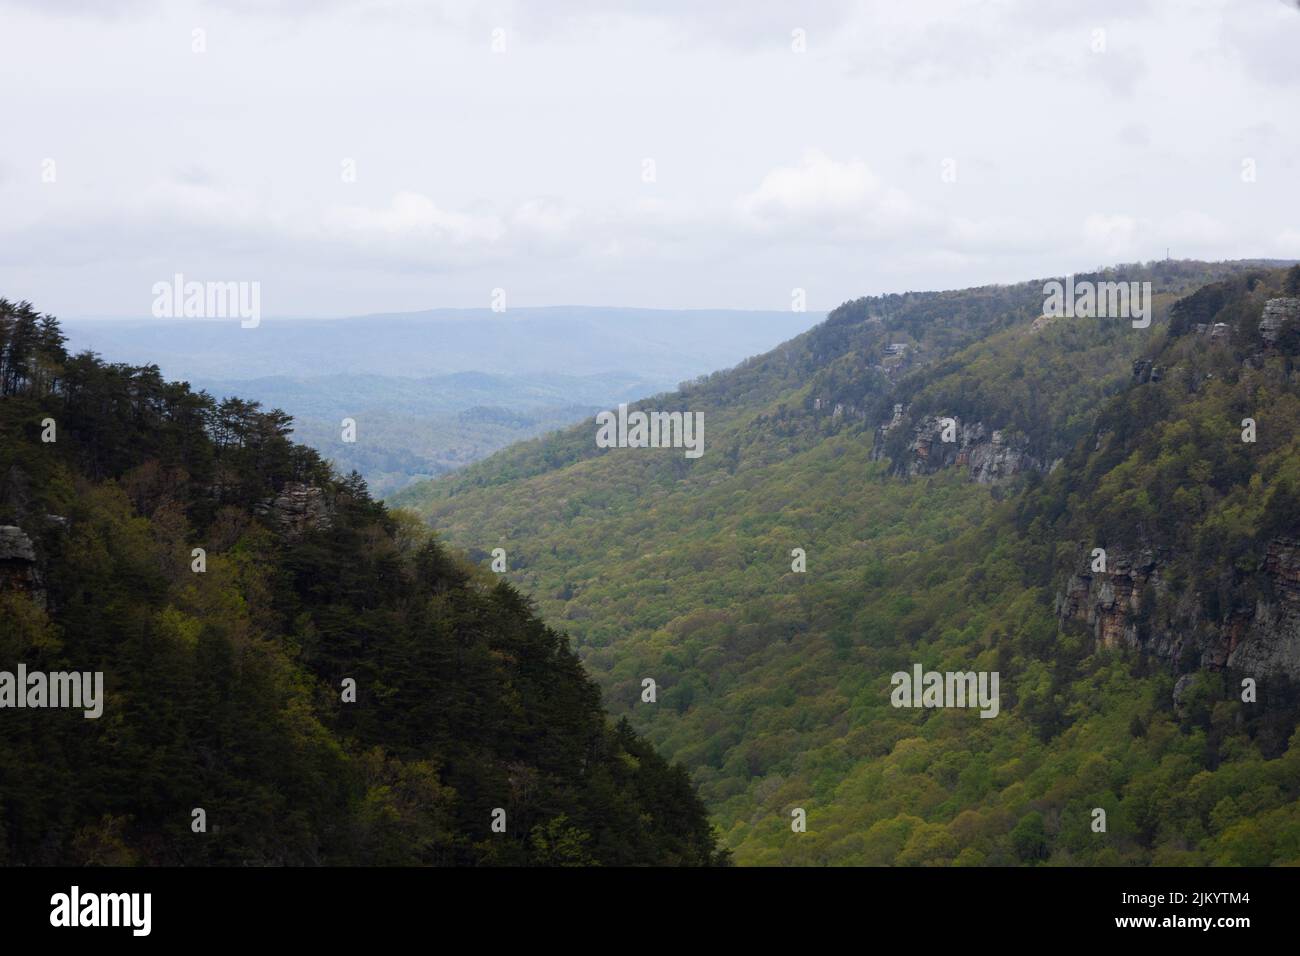 A beautiful view of the mountain valley in a cloudy morning in Chattanooga, Tennessee Stock Photo